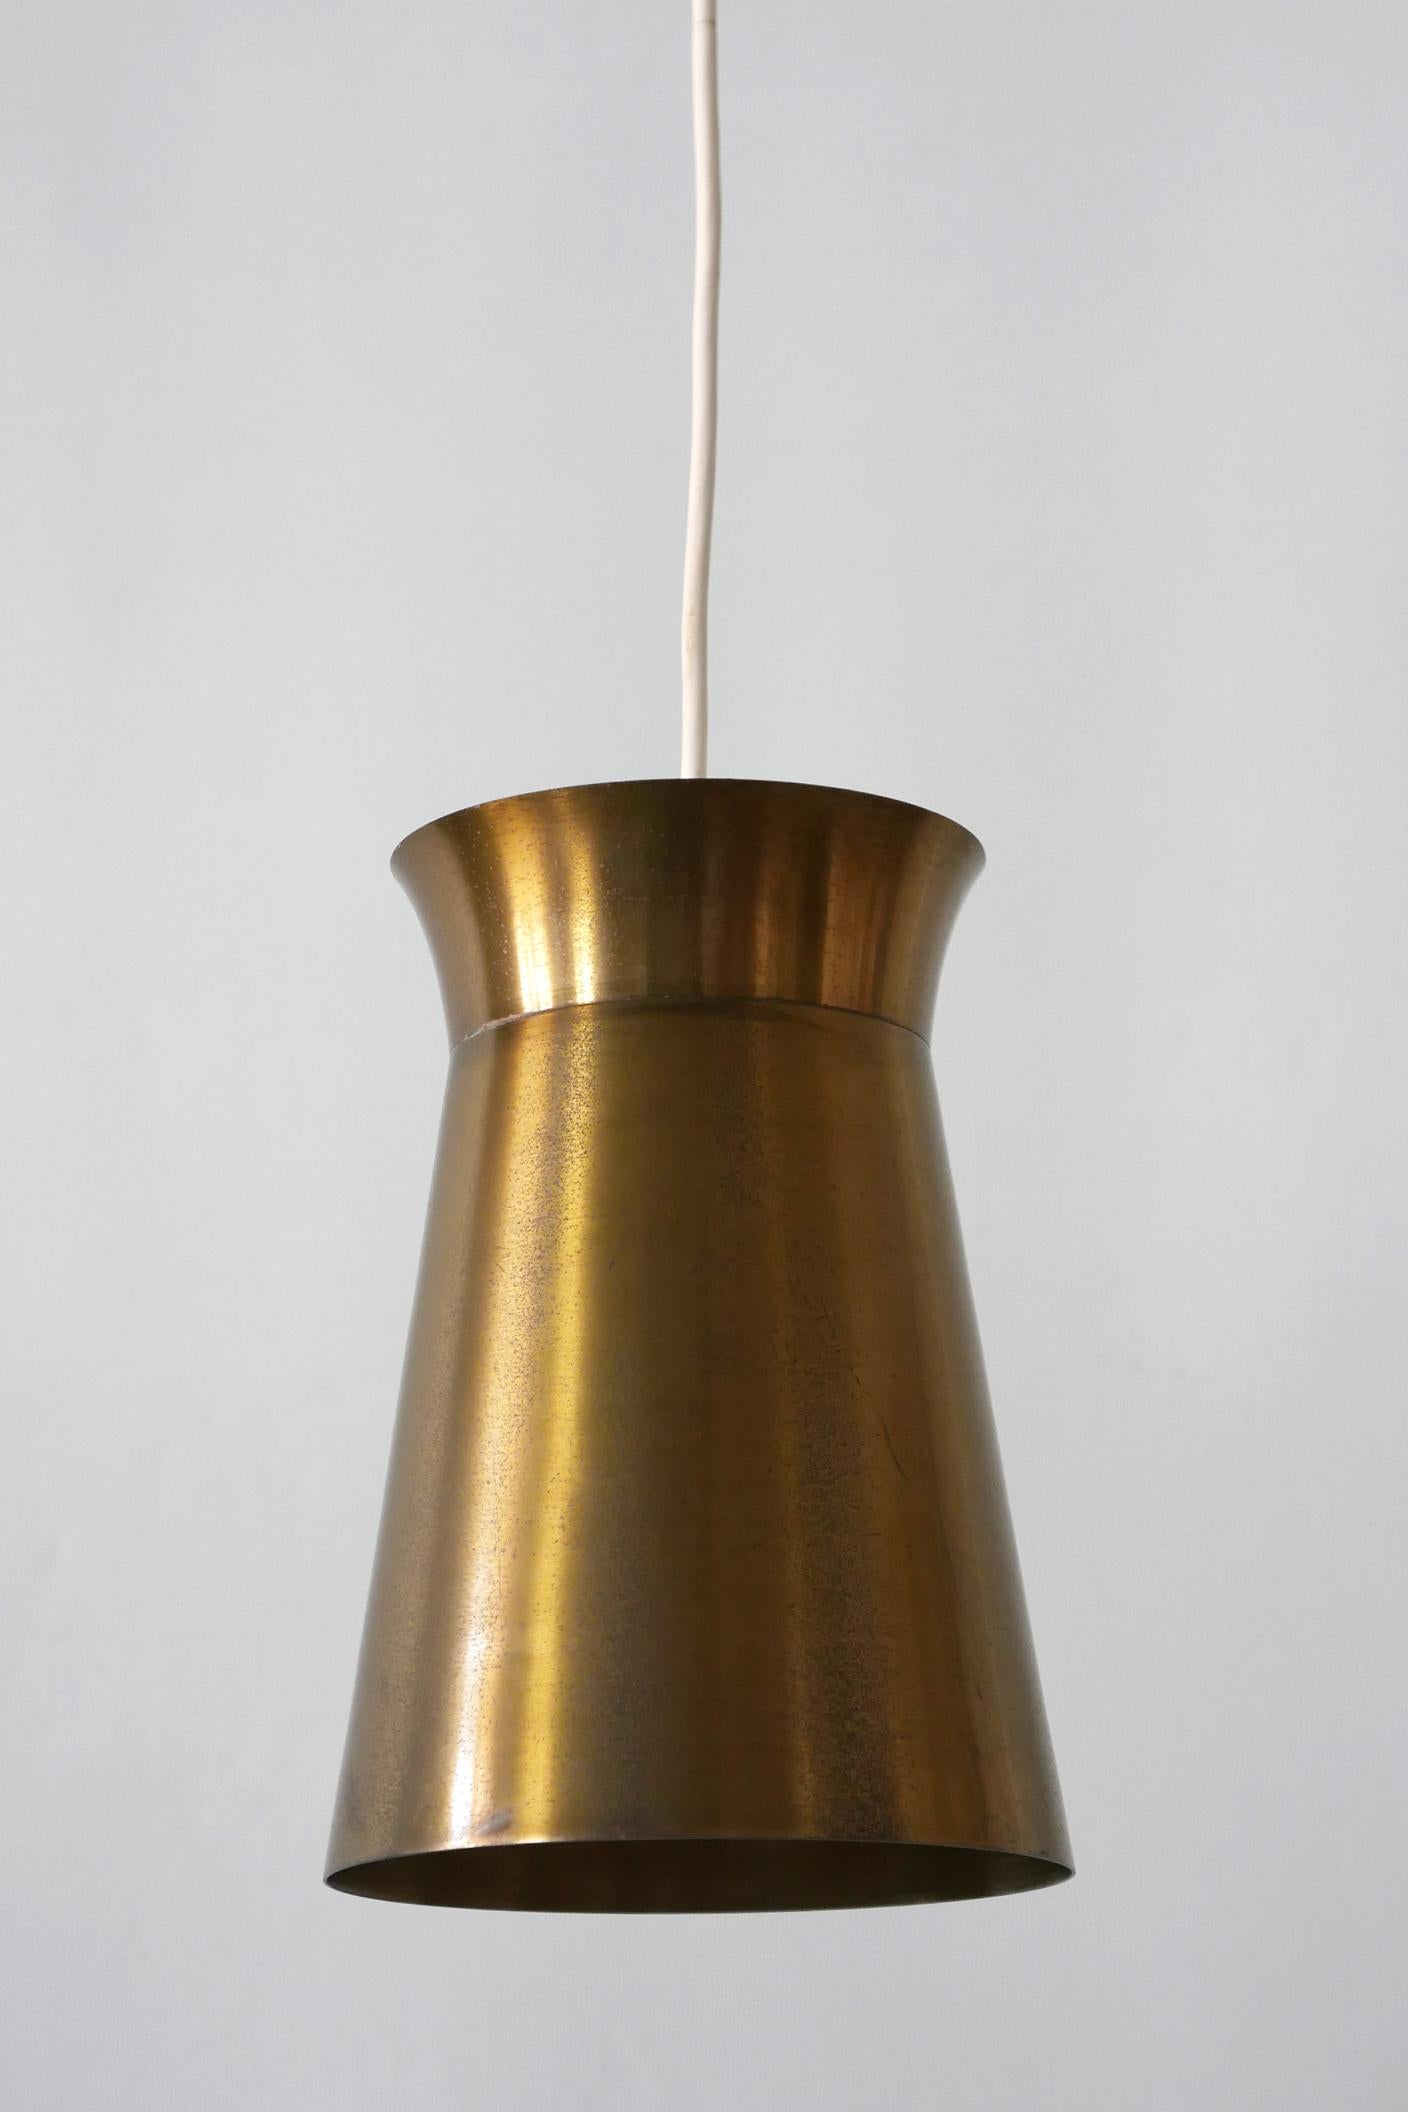 Elegant Mid-Century Modern Brass Pendant Lamps or Hanging Lights, 1950s, Germany For Sale 1